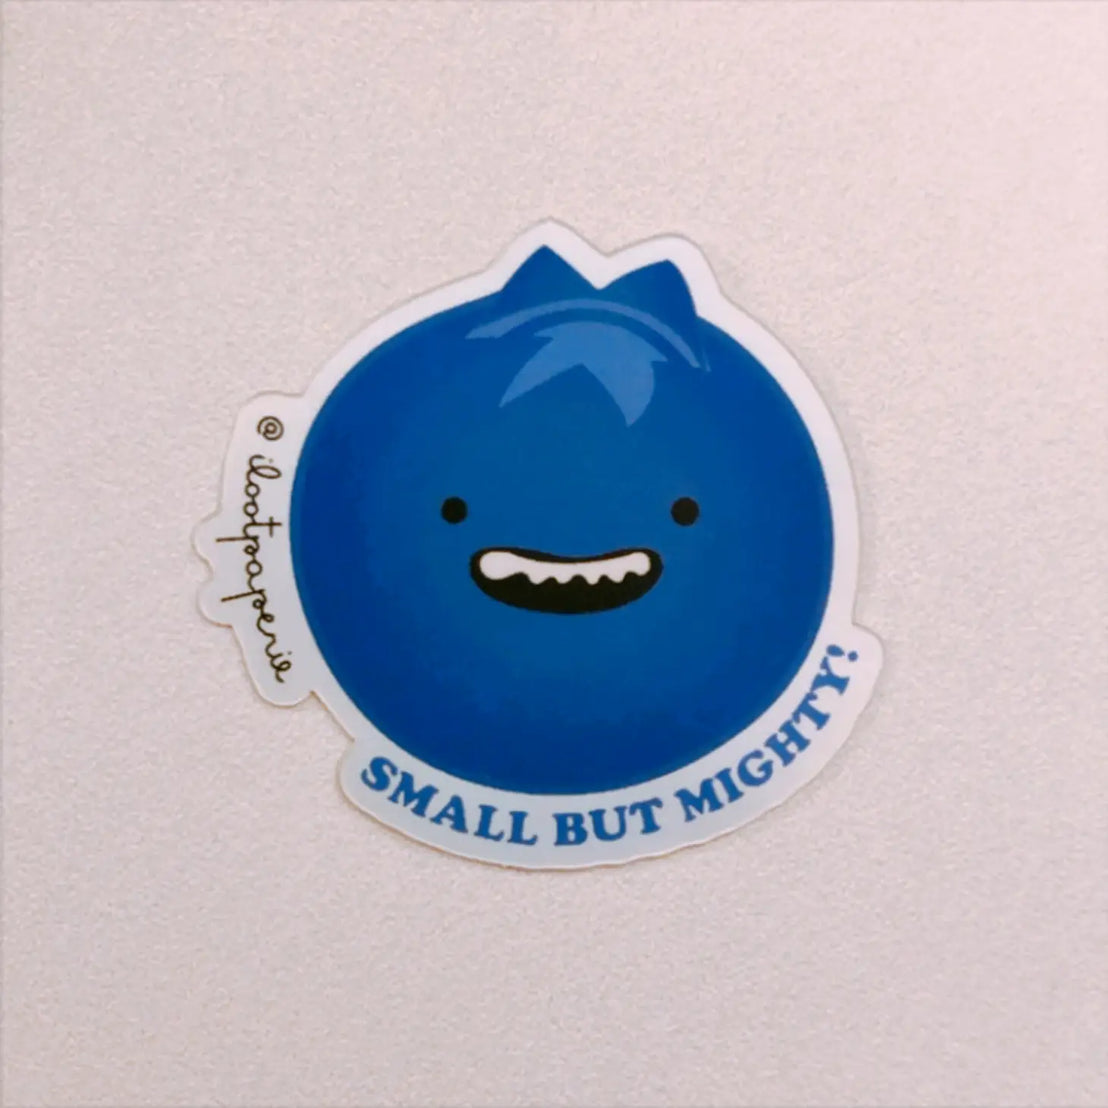 Small But Mighty Blueberry Sticker